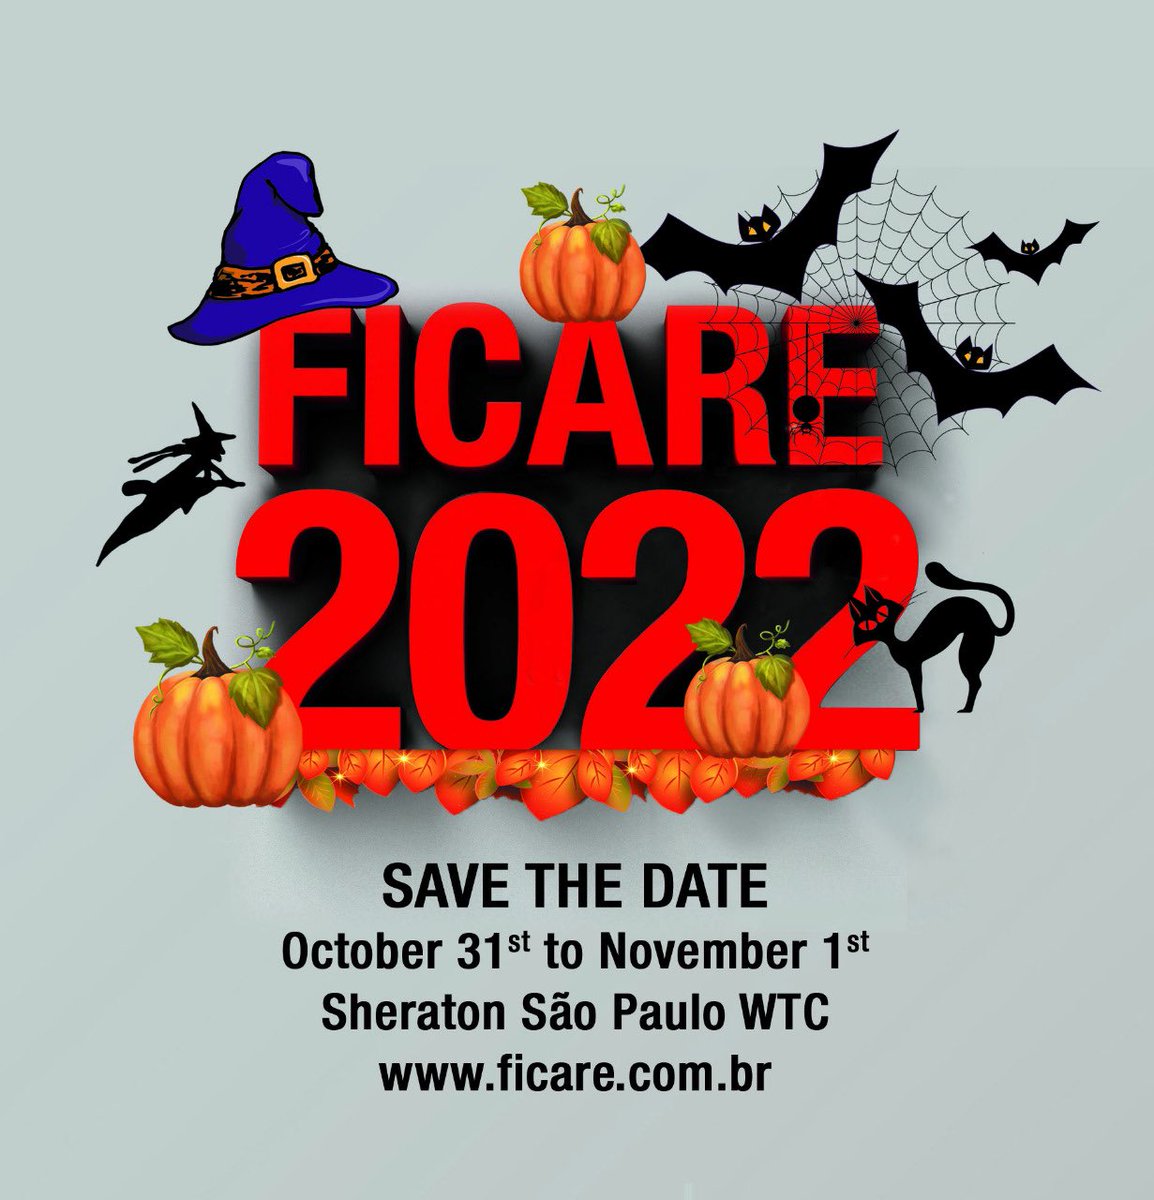 Get ready for the most exciting Halloween ever! Rectal cancer has never been so scary! See you all there!! @guilhermepc91 @brunabvailati @yoshi_konishi @JoshSmithMDPhD @DrGarciaAguilar @MirandaKusters @QDenost